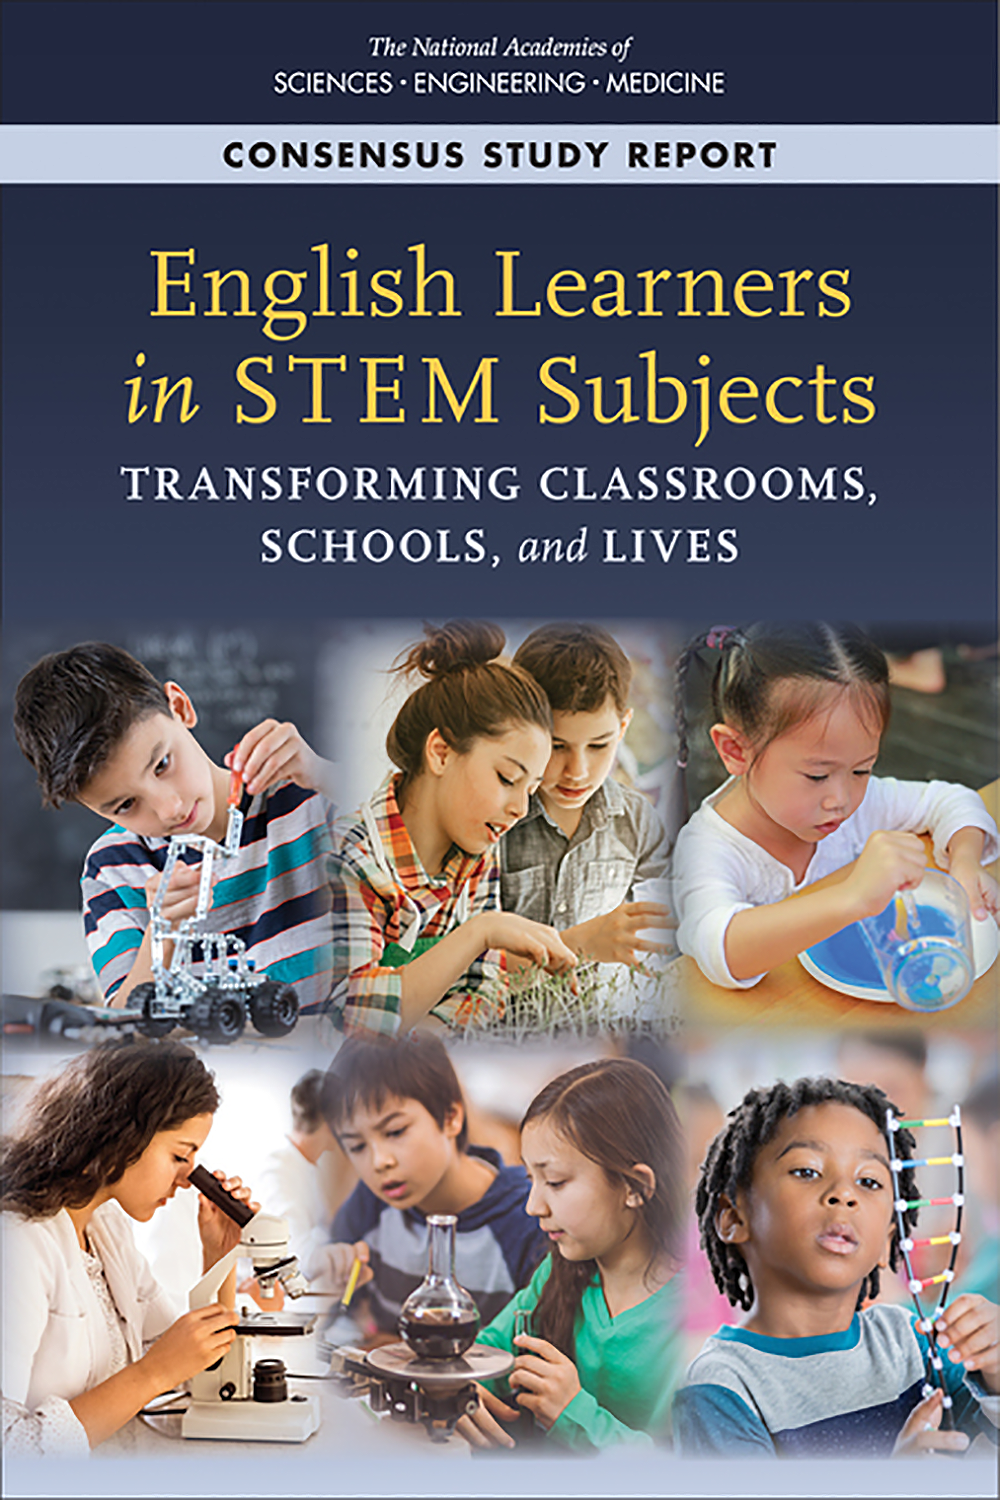 English Learners in STEM Subjects: Transforming Classrooms, Schools, and Lives